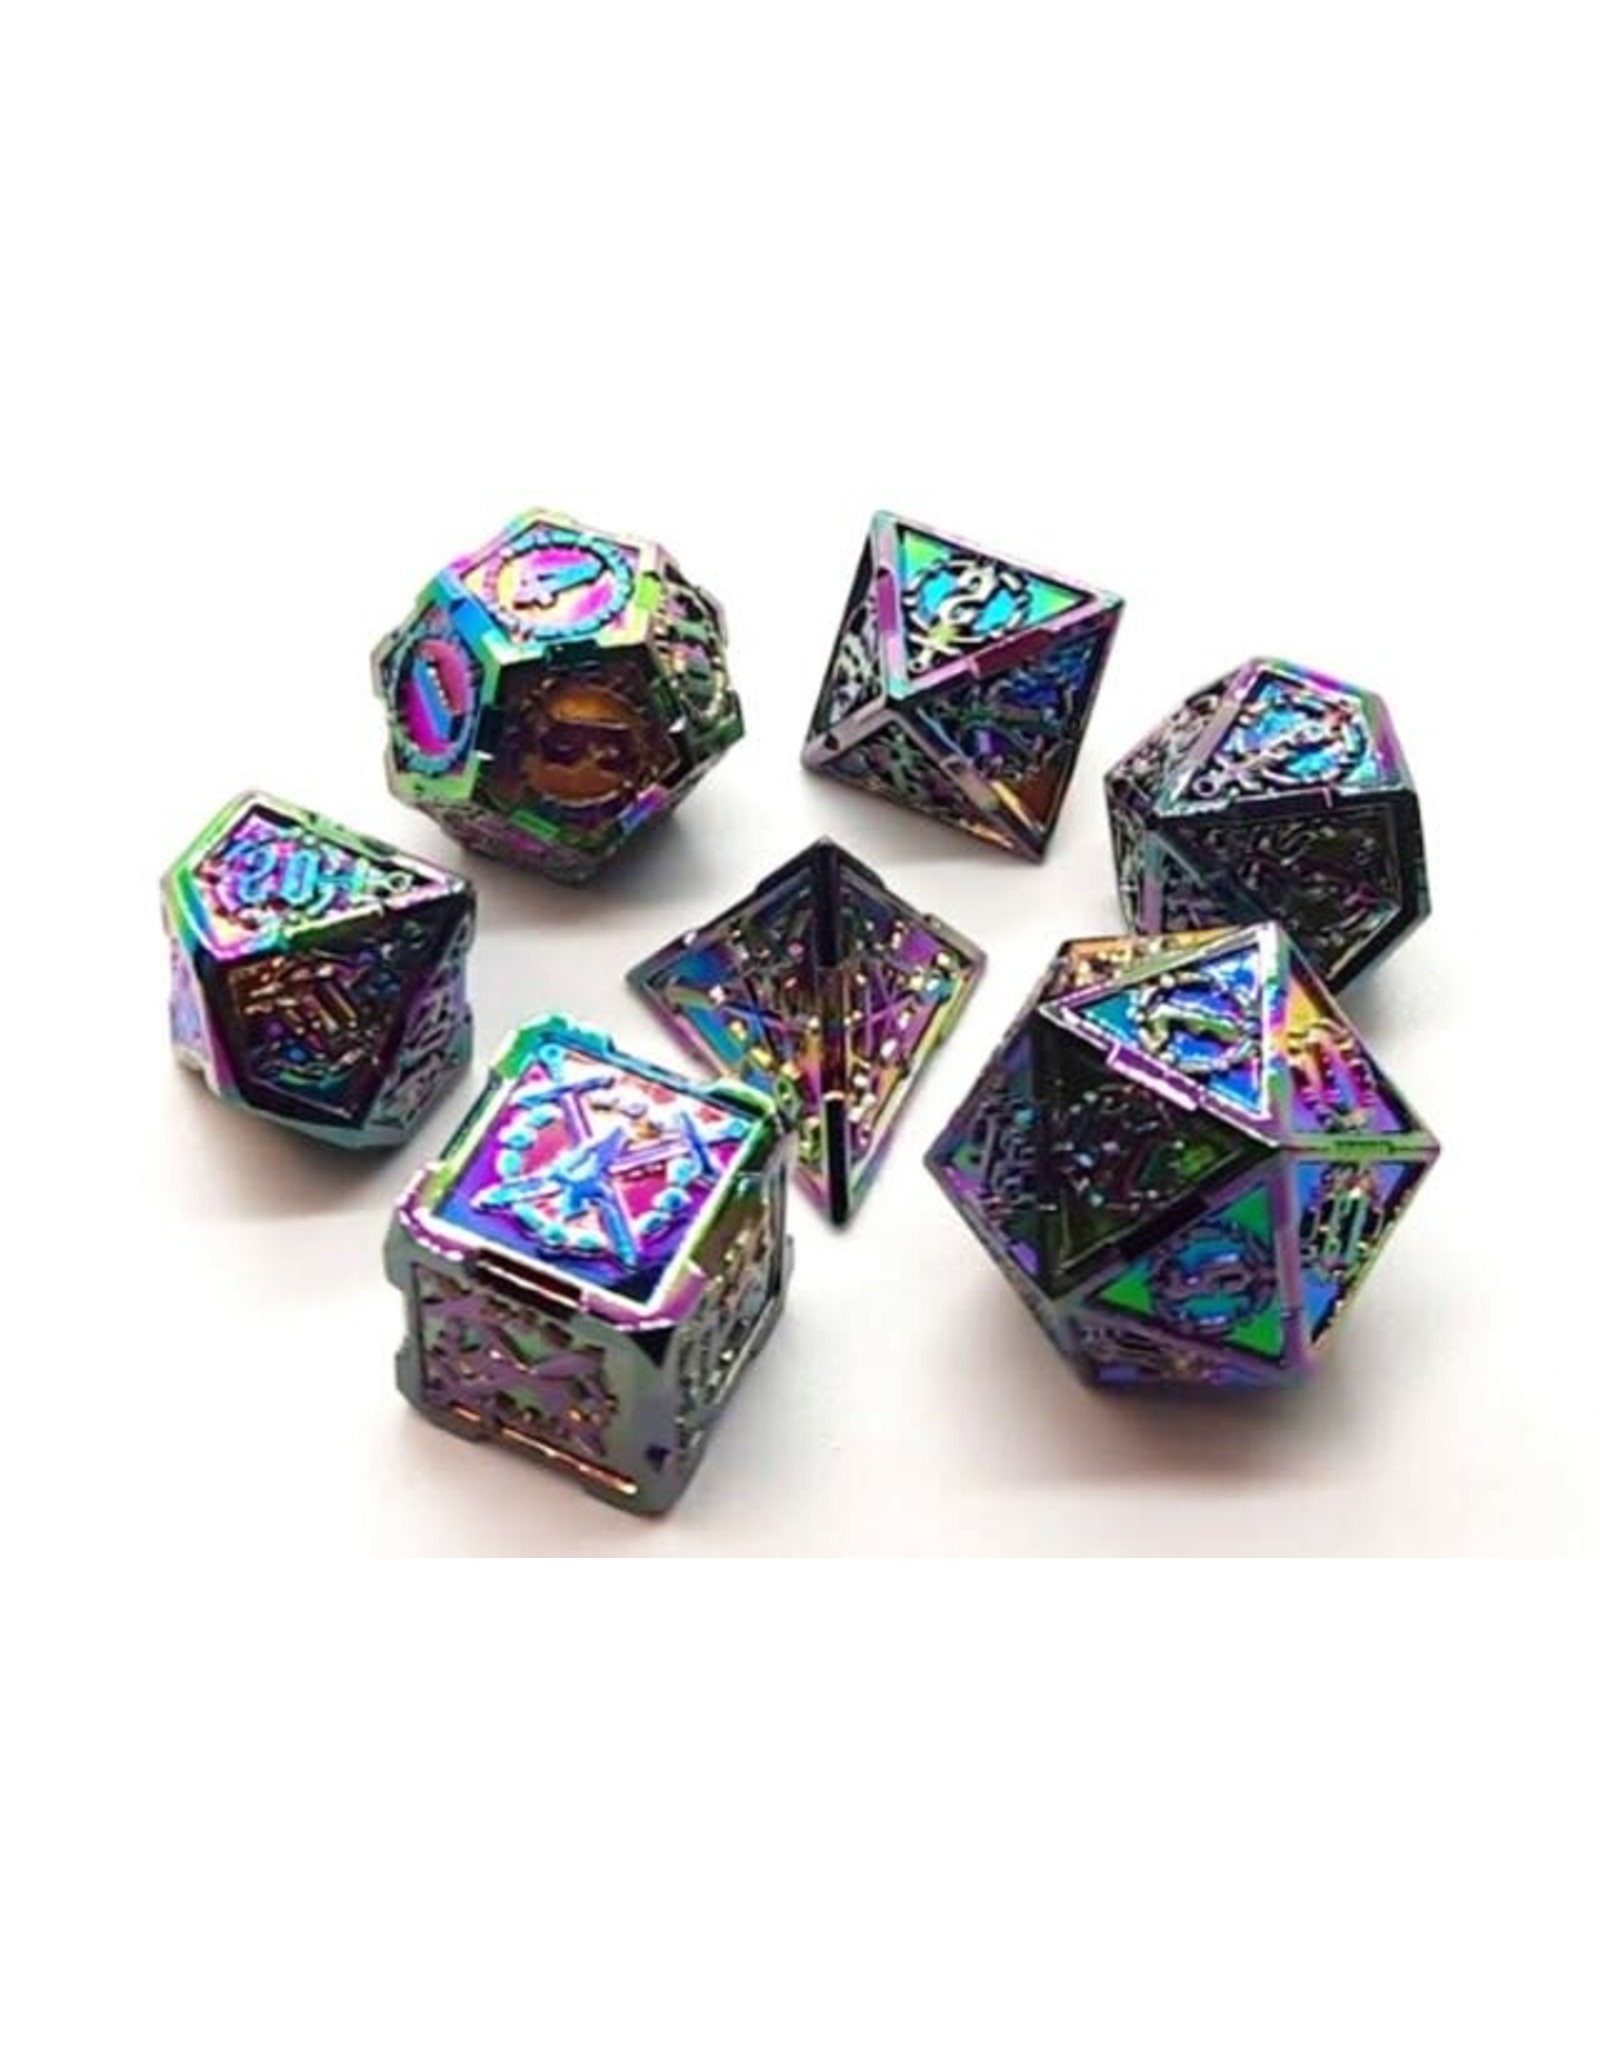 Old School Dice Old School 7 Piece DnD RPG Metal Dice Set: Knights of the Round Table - Spectral